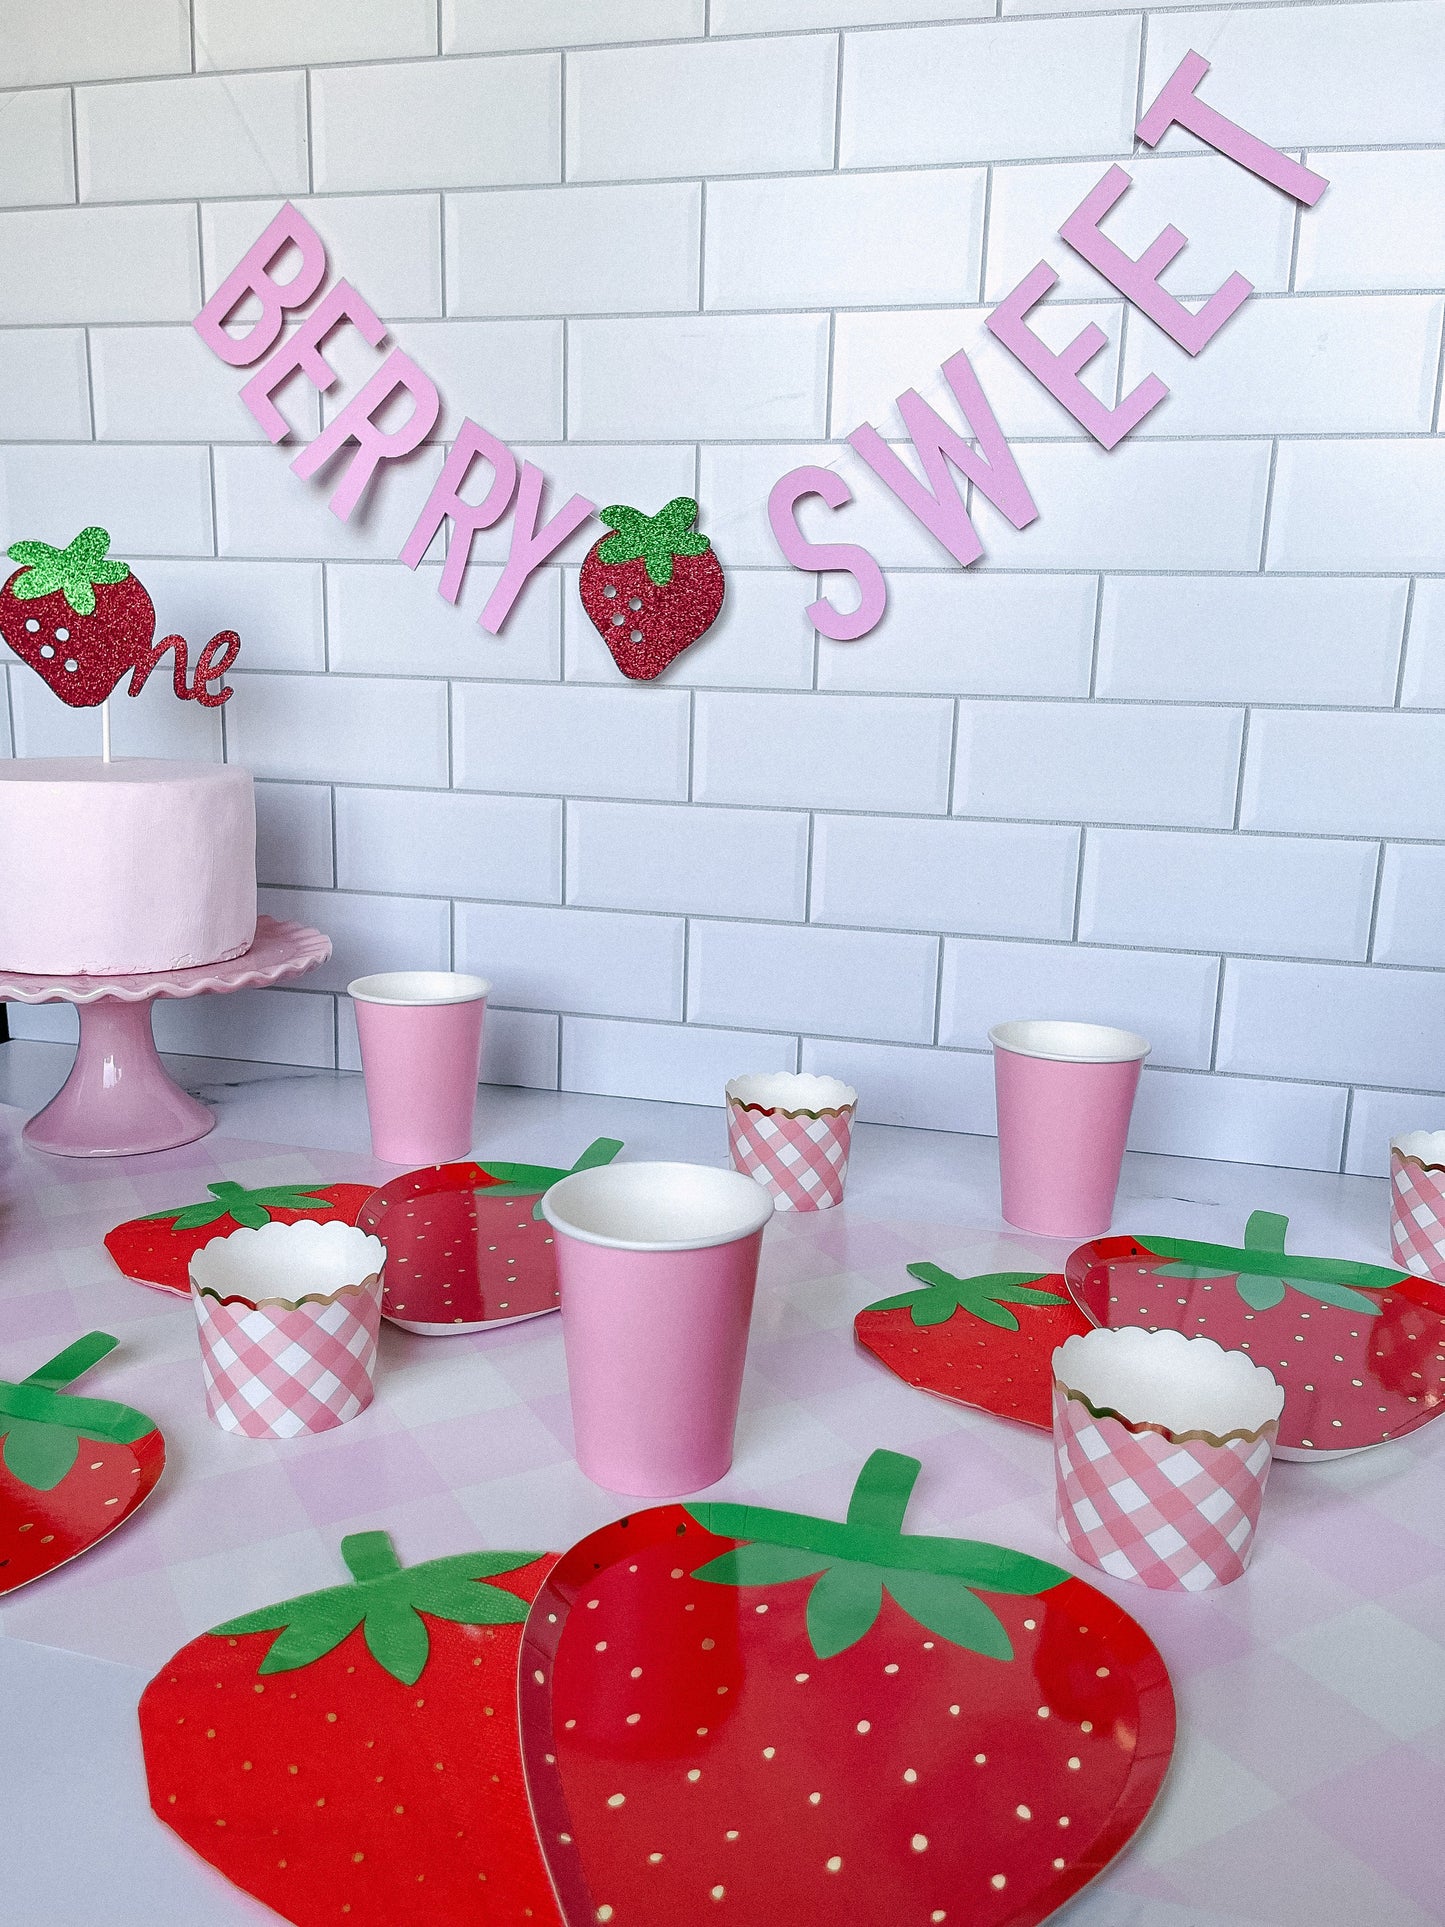 Deluxe Berry Sweet Party Box